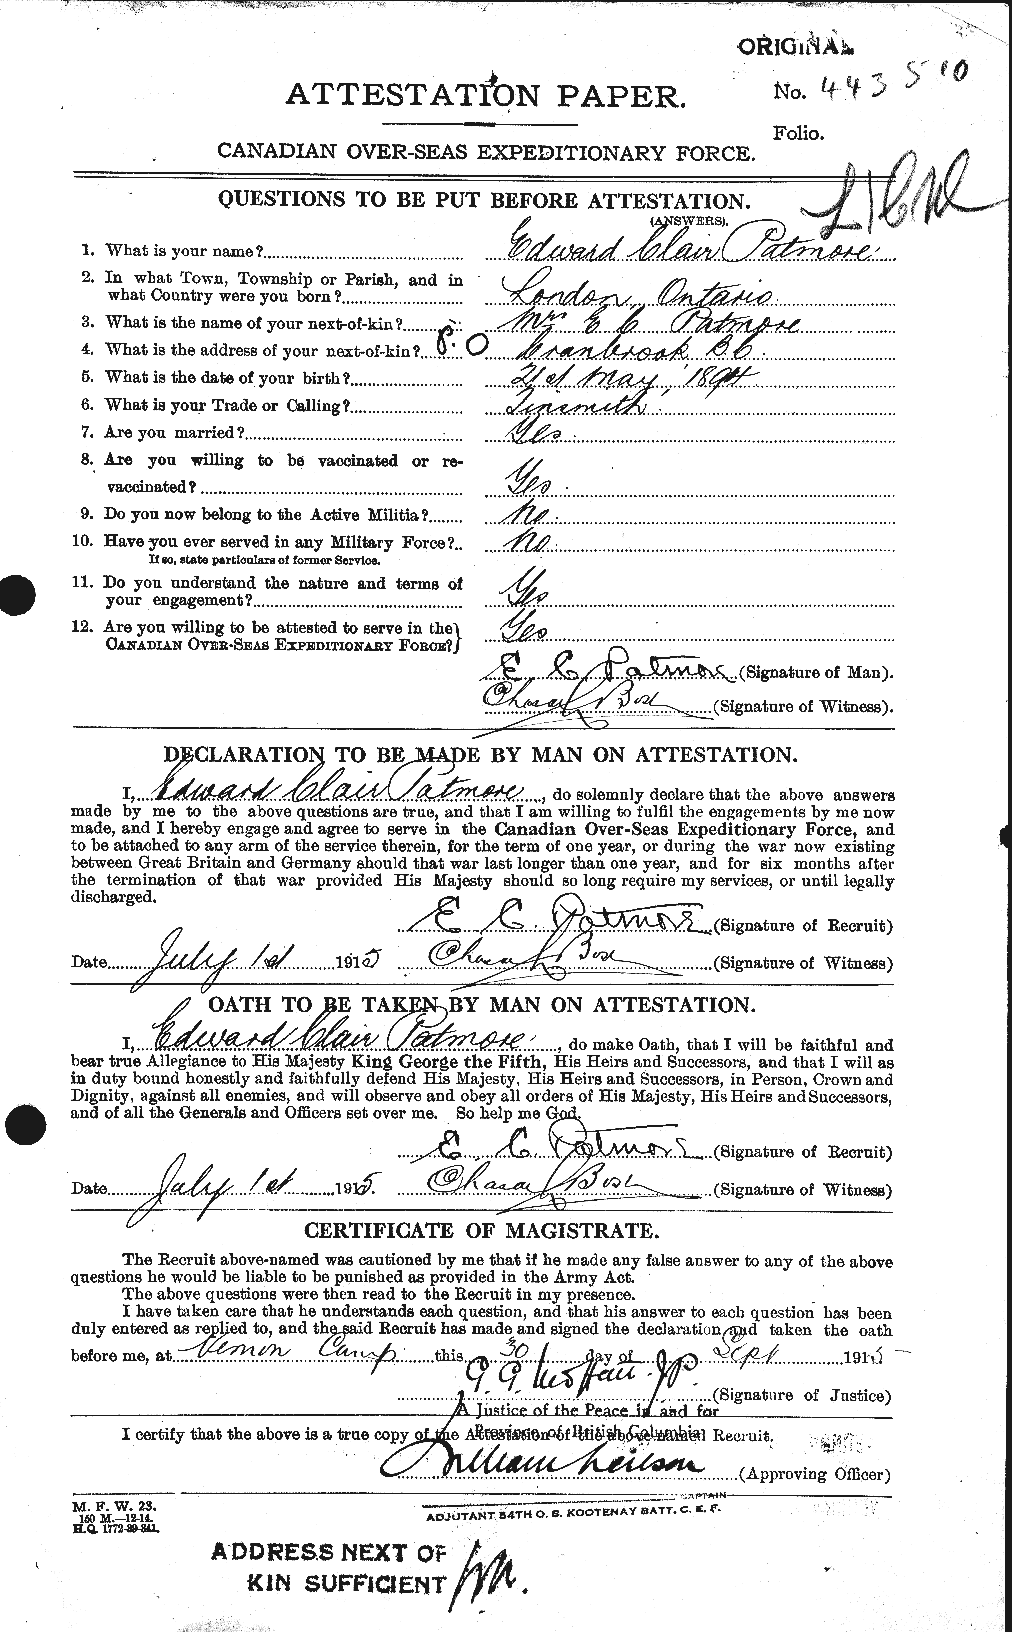 Personnel Records of the First World War - CEF 567872a